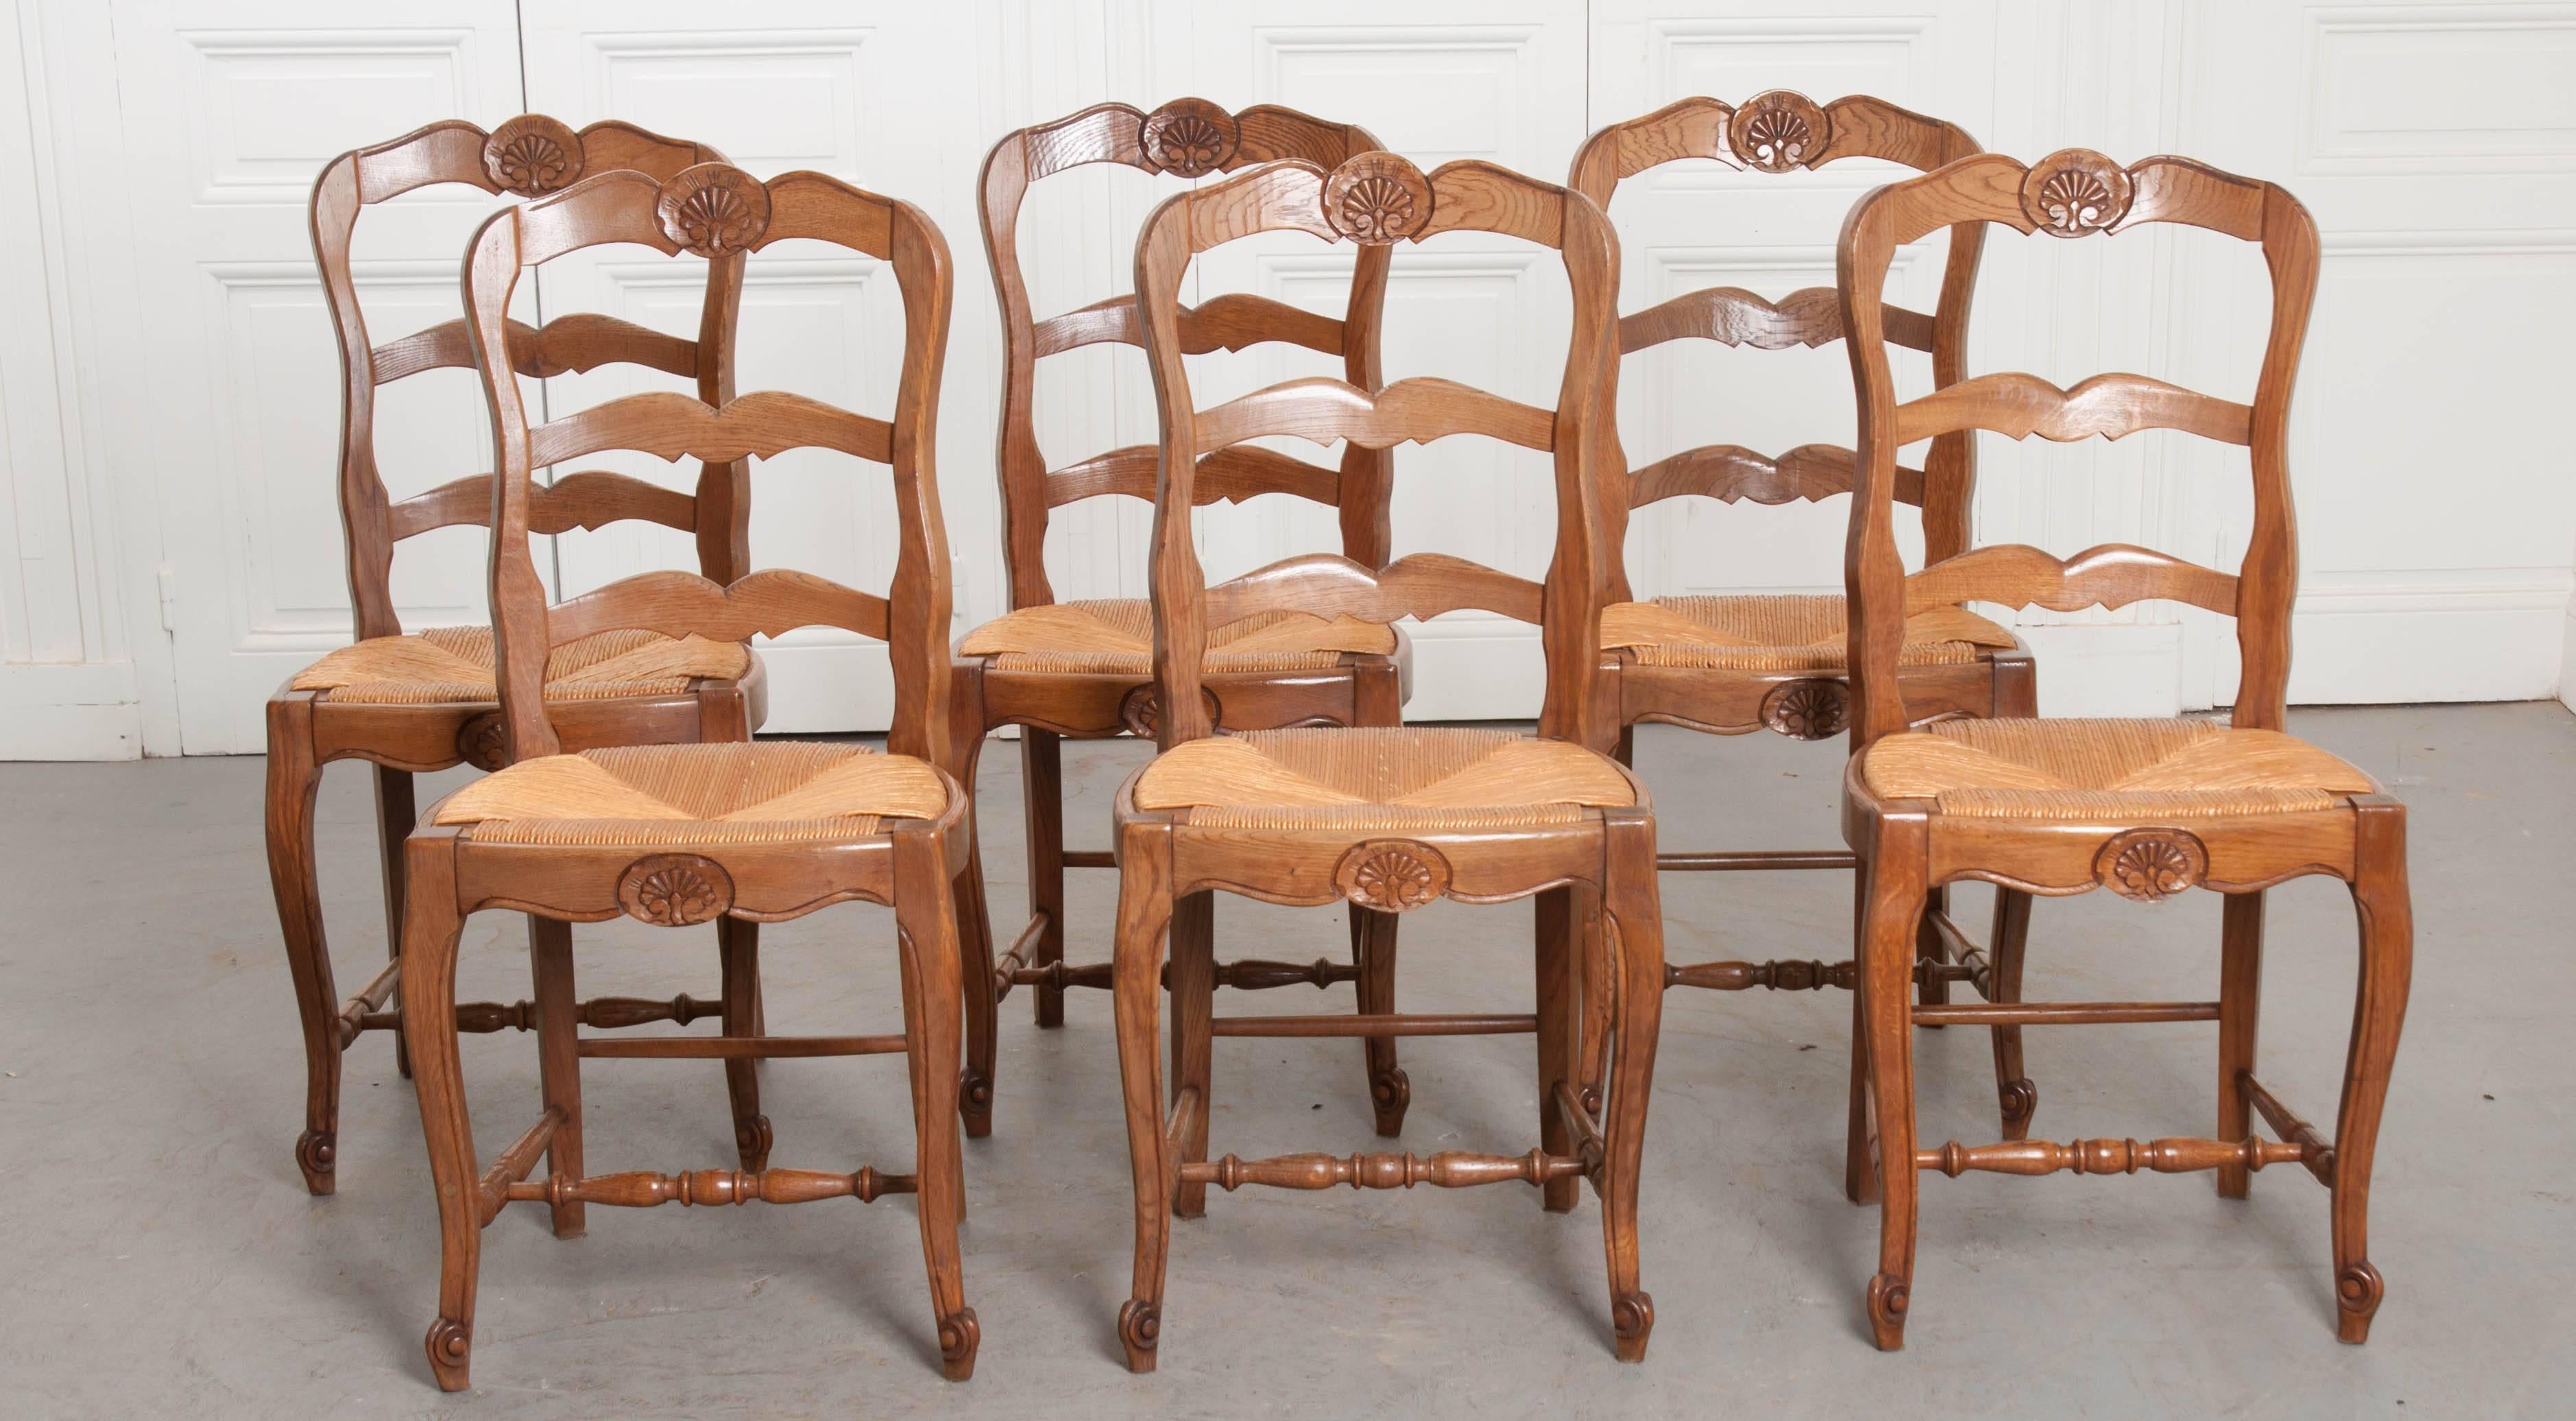 A charming set of six French oak ladder back chairs made in the 1940s. A beautiful carved shell cartouche graces the chairs’ top and front rails. The rush seats are in excellent antique condition and have a height of 18 1/2. The seats are removable.